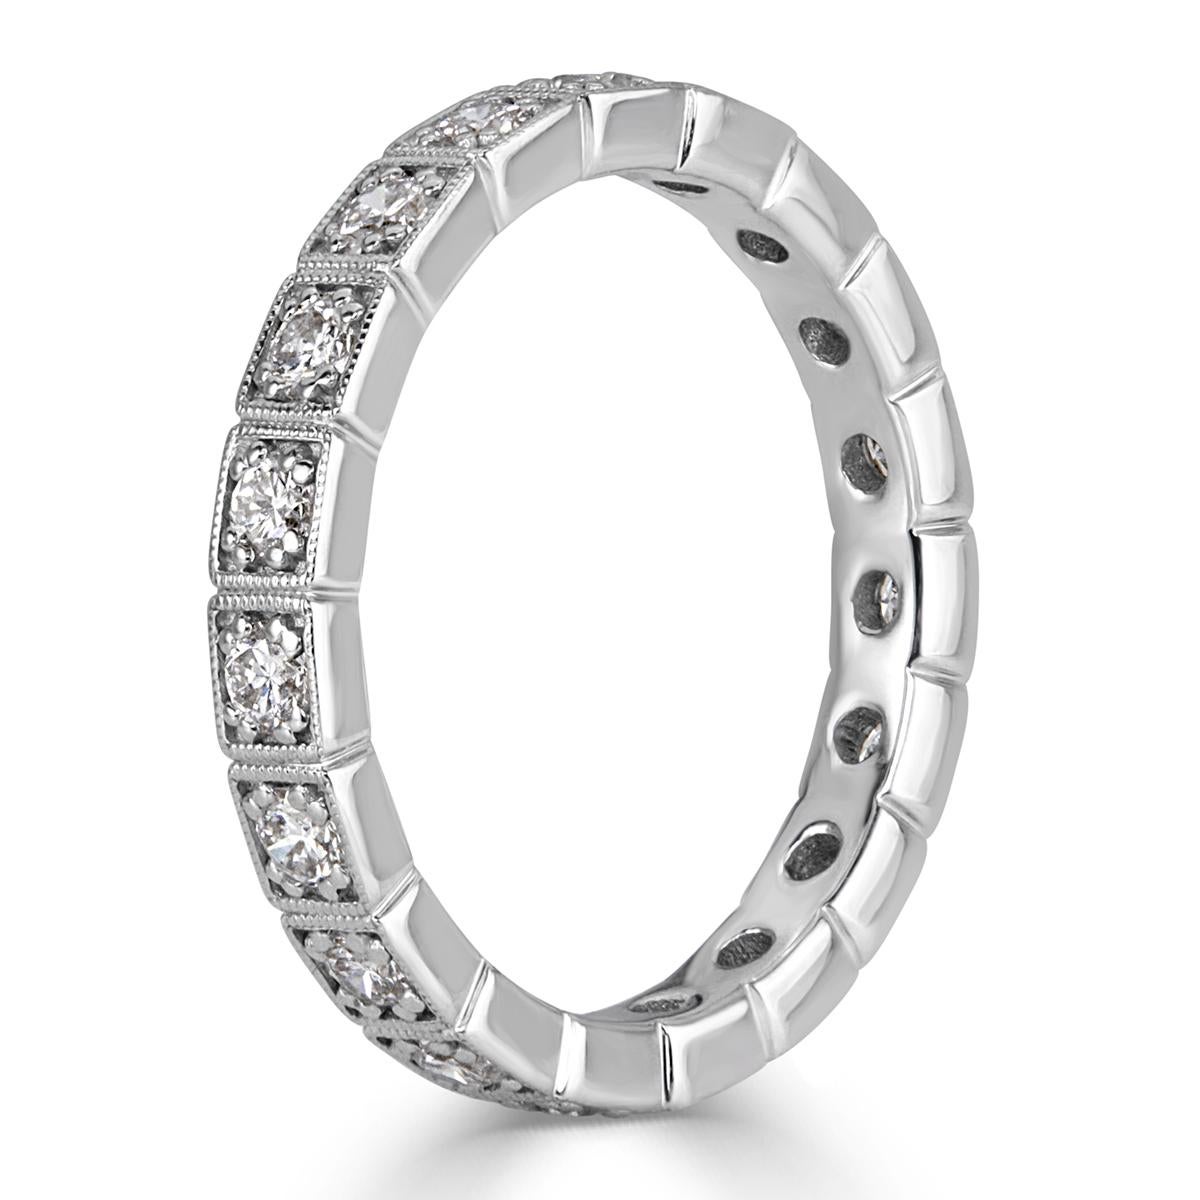 This vintage style diamond eternity band features 0.80ct of round brilliant cut diamonds graded at E-F, VVS2-VS1, measuring at 2.9mm. All eternity bands are shown in a size 6.5. We custom craft each eternity band and will create the same design for